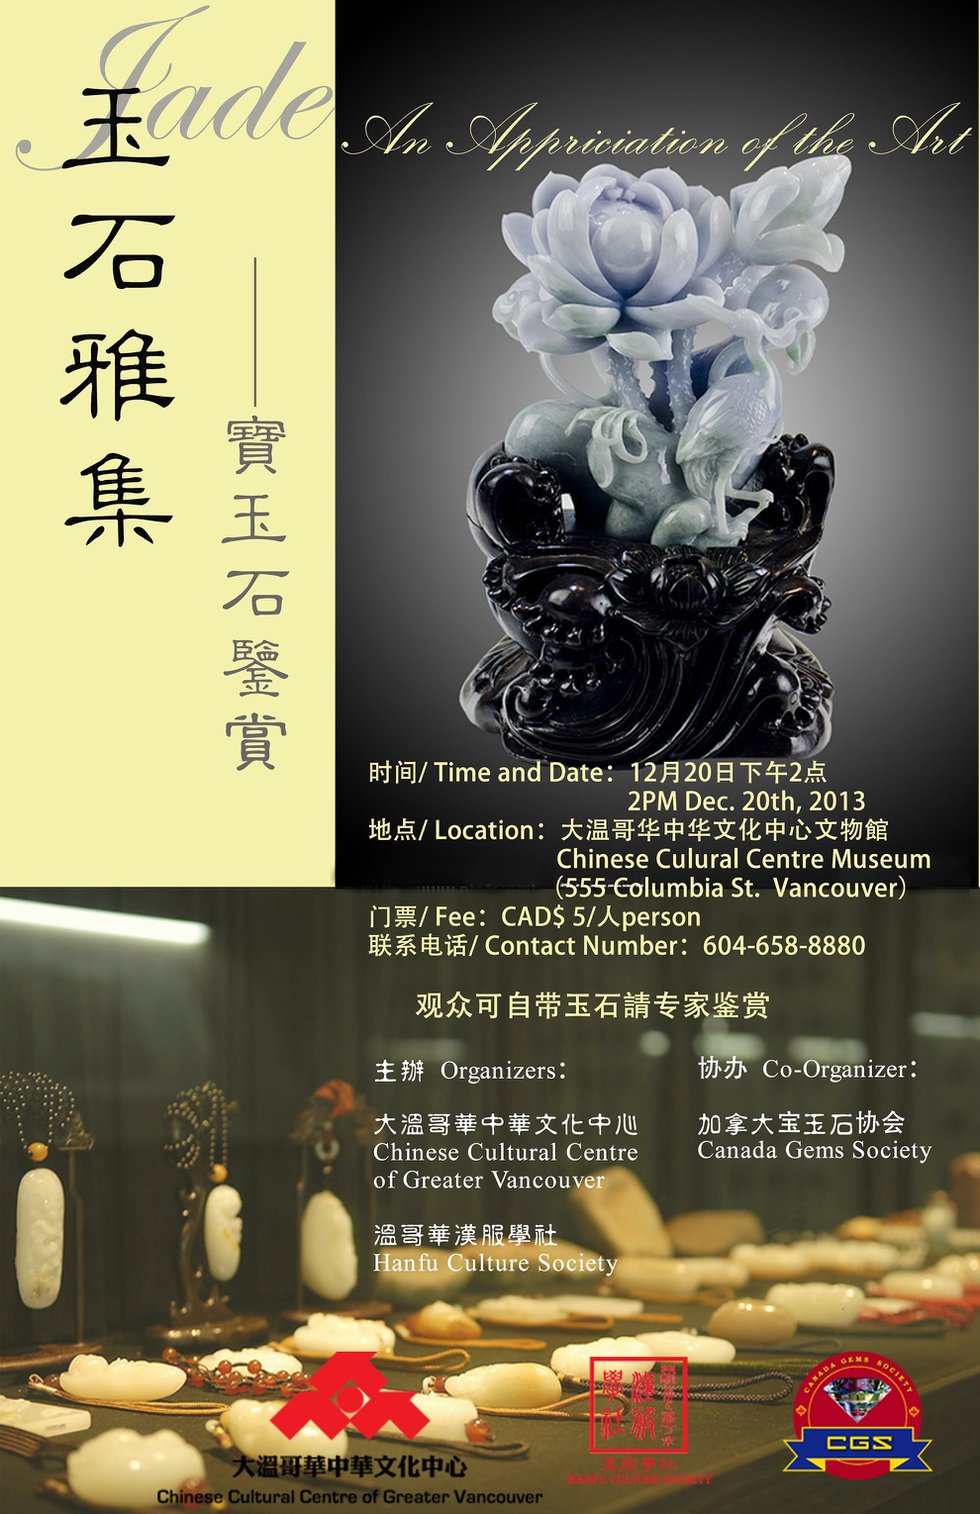 "Jade: An Appreciation of the Art" exhibition poster